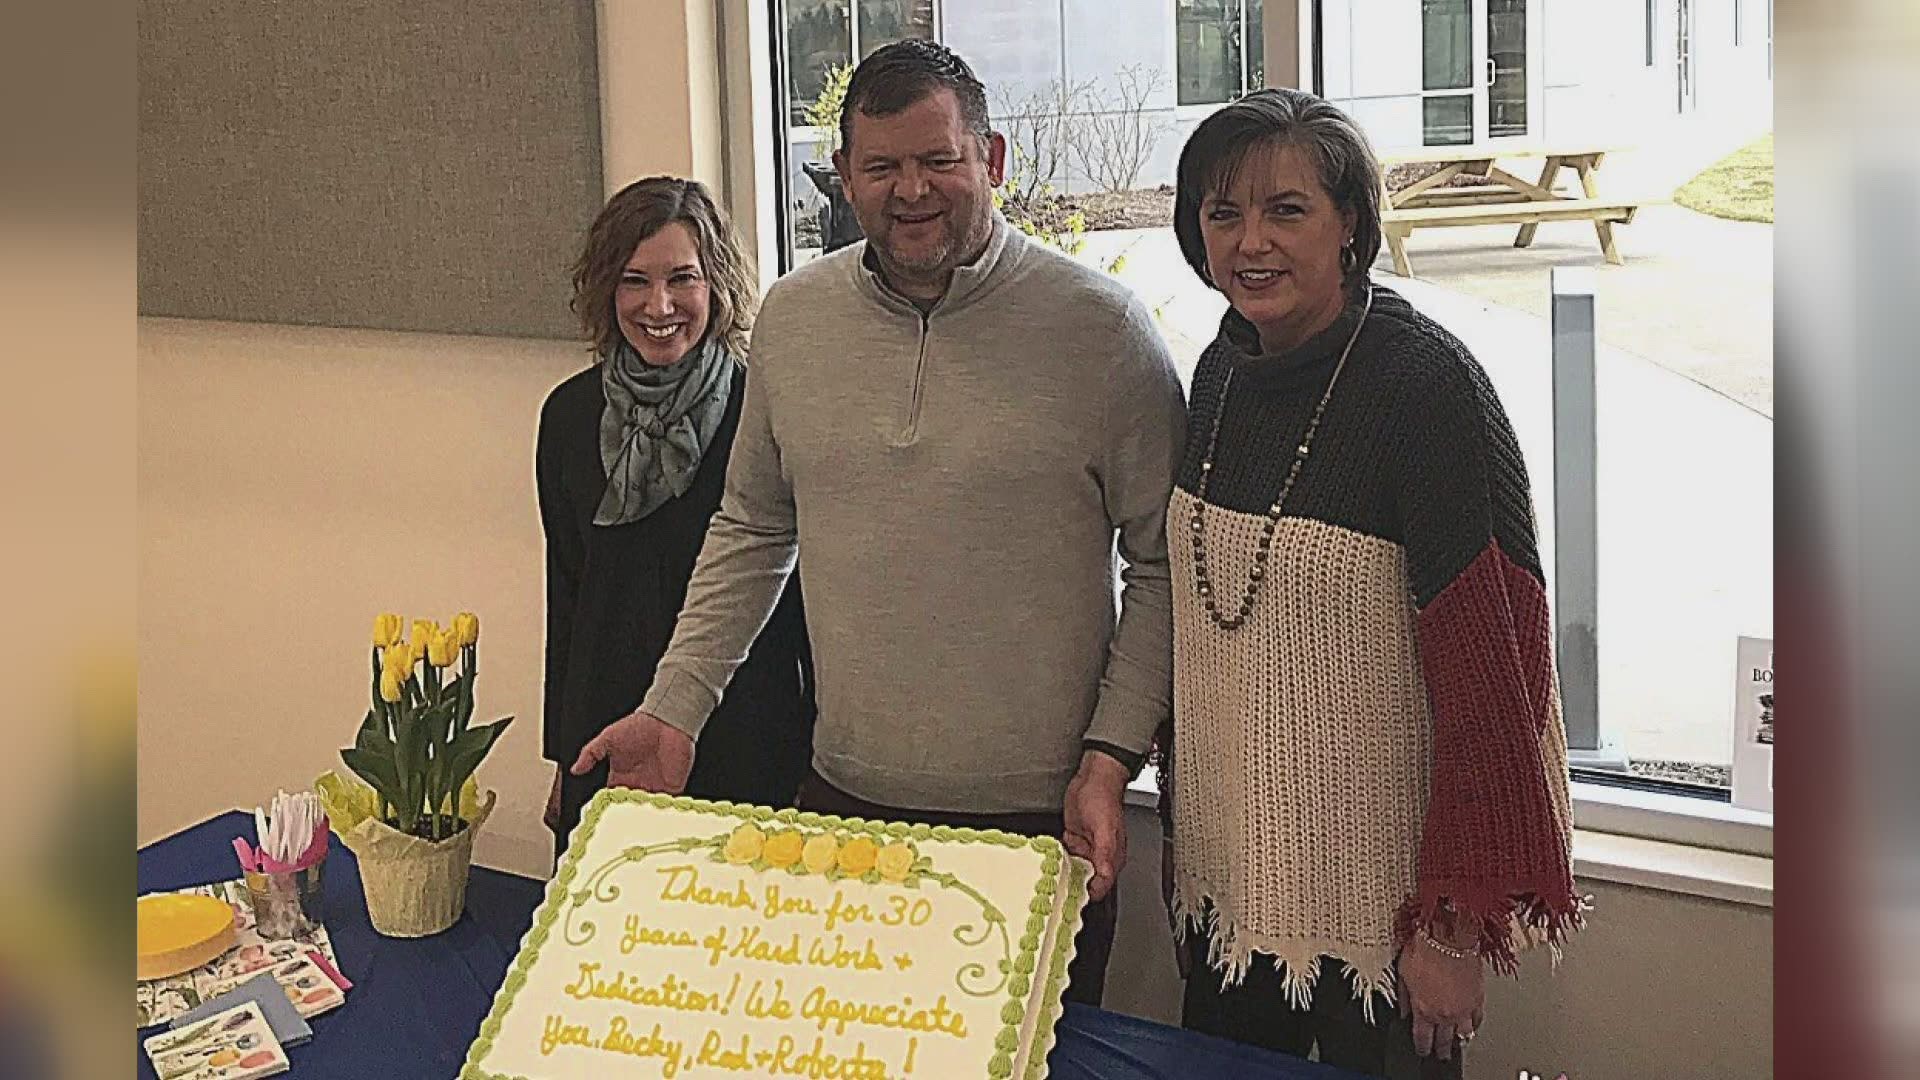 The three teachers have each taught for 30 years at South Christian High School.